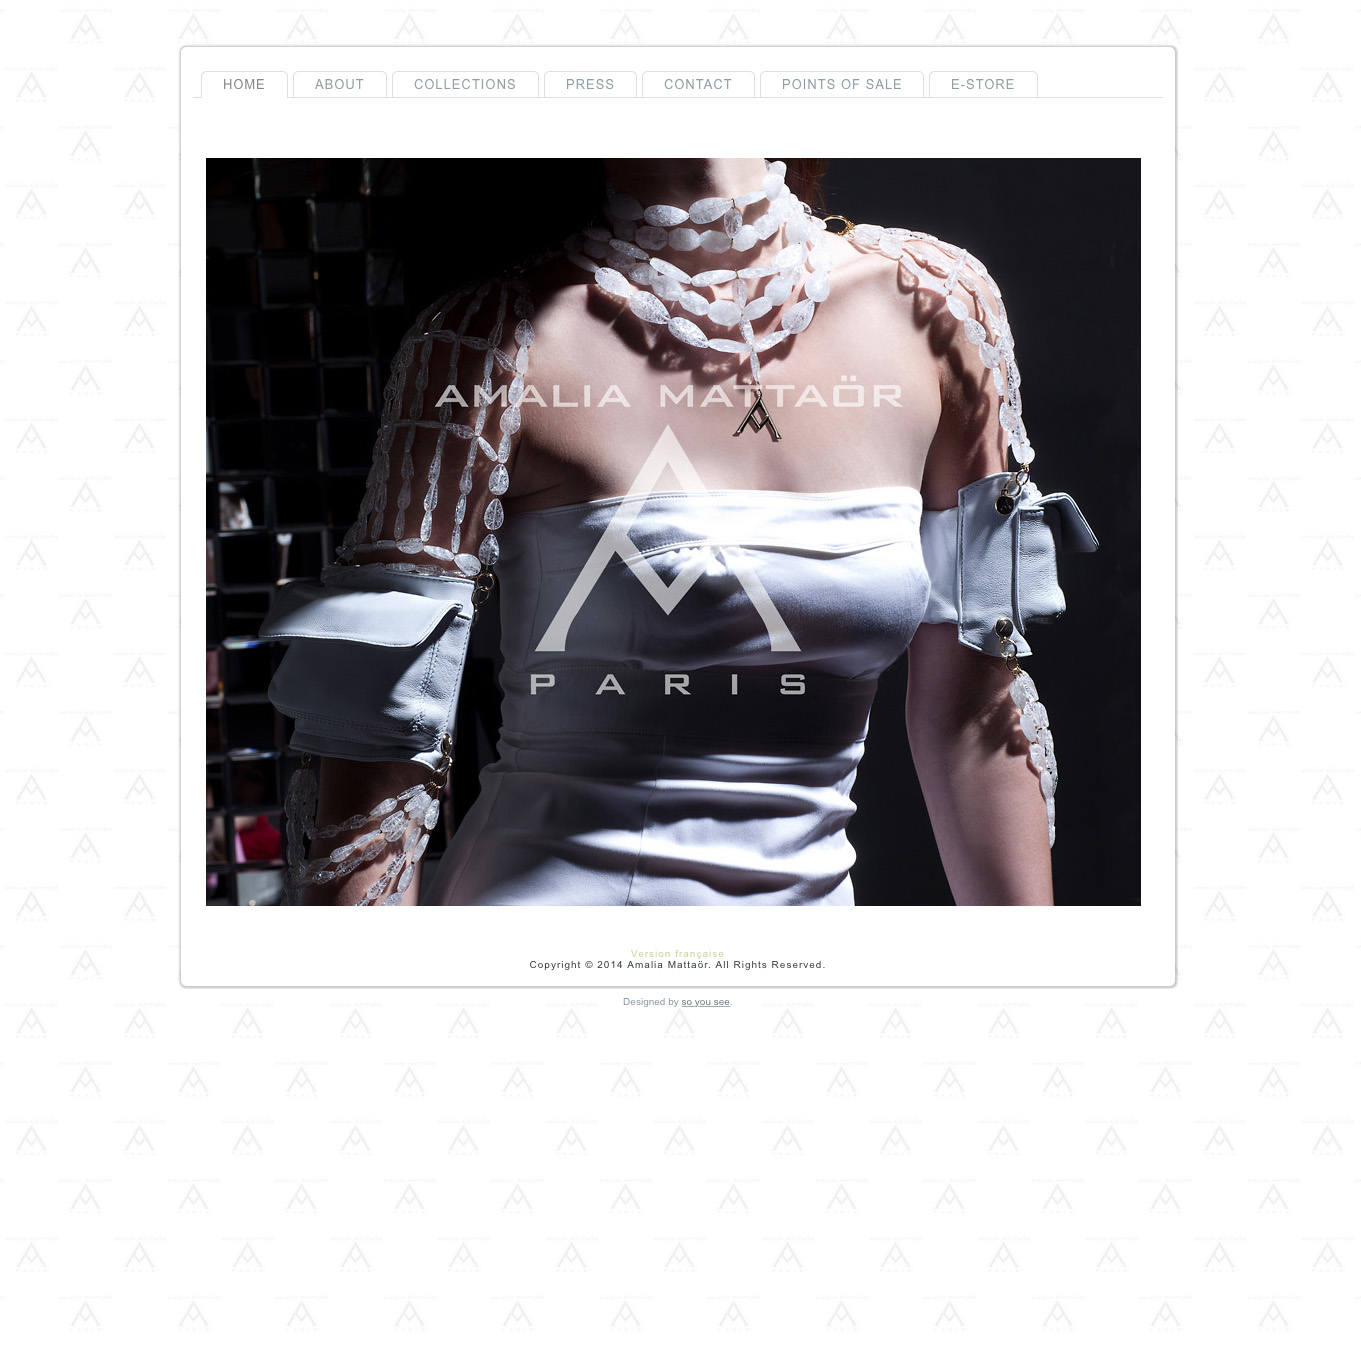 You are currently viewing Le site web d’Amalia Mattaor